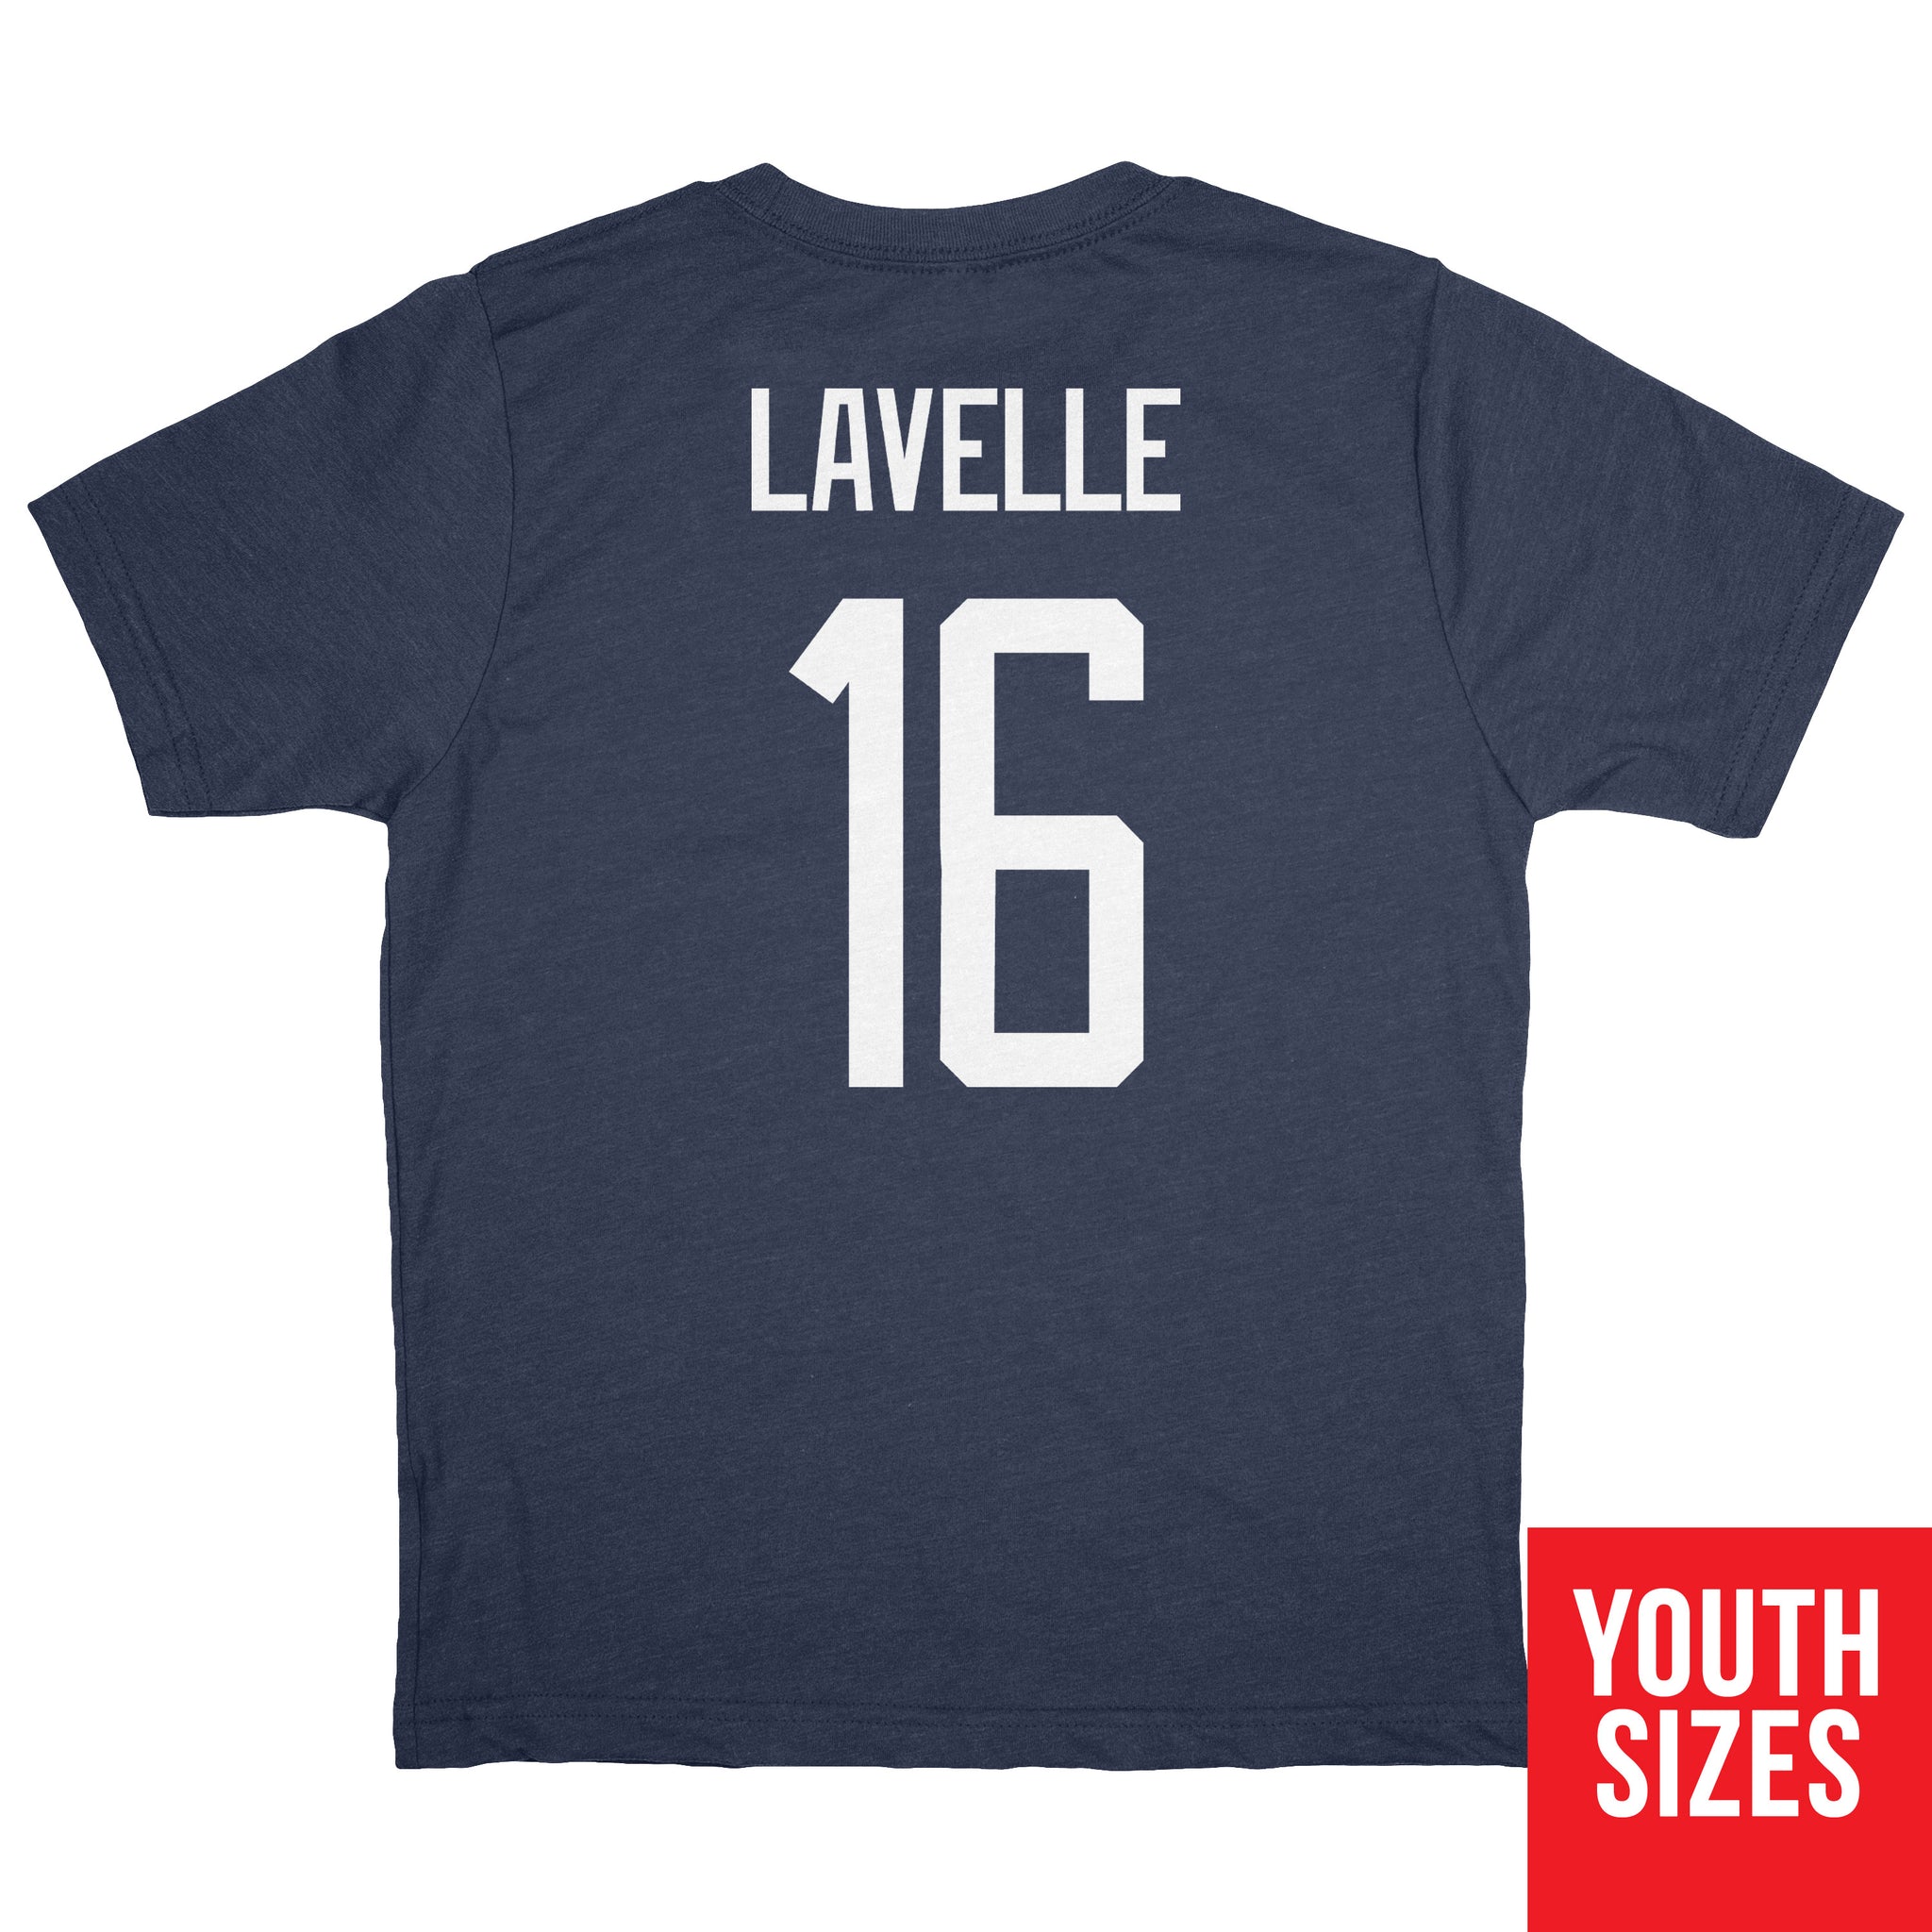 rose lavelle jersey youth